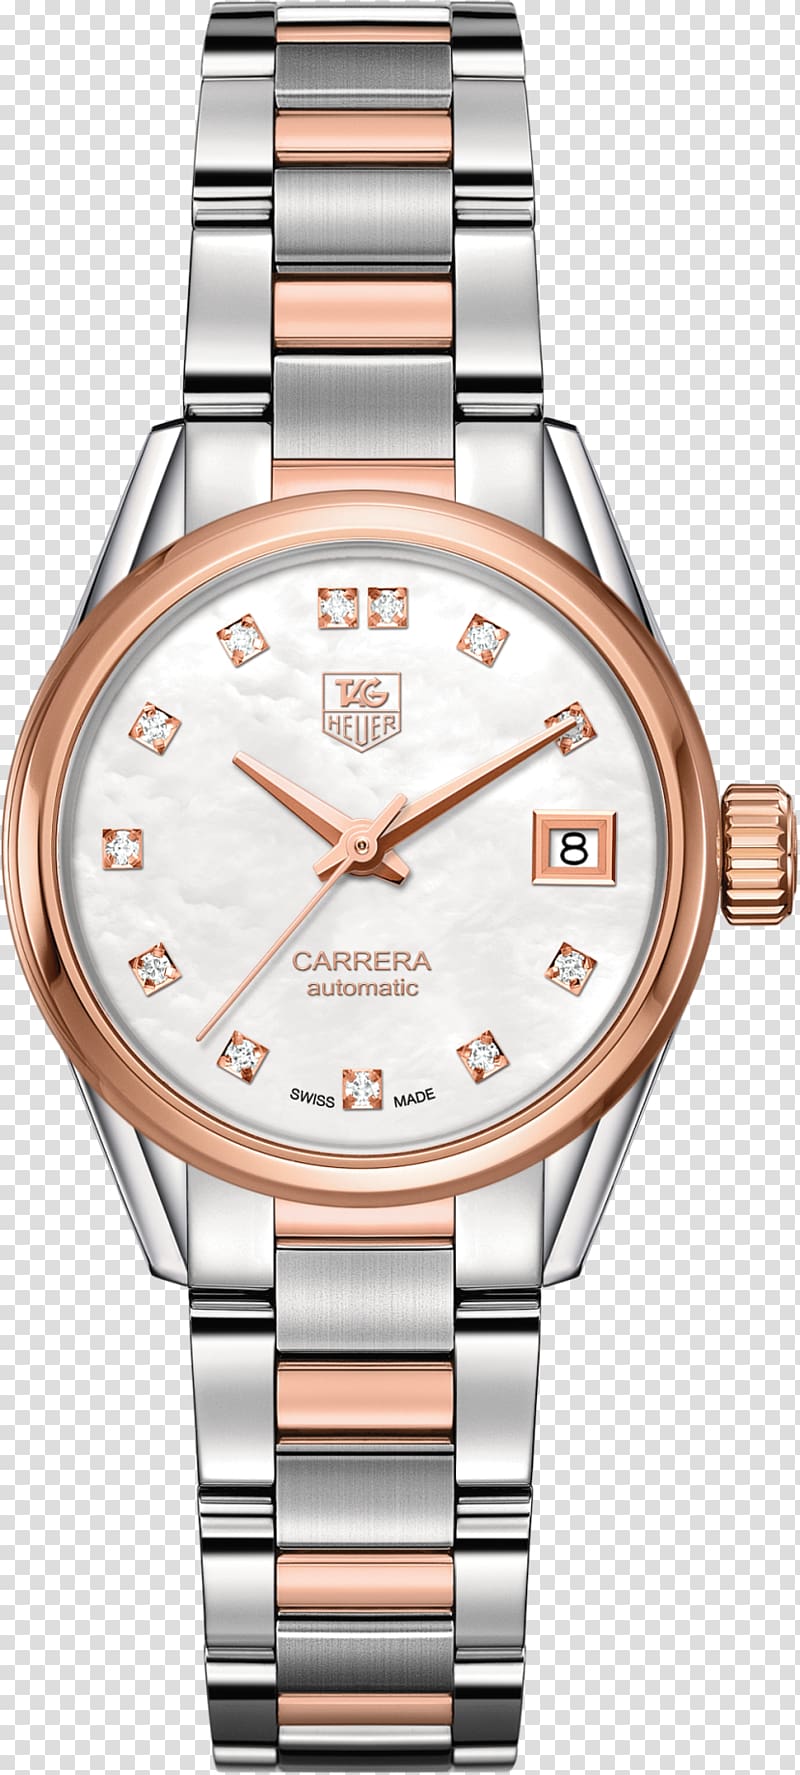 TAG Heuer Carrera Calibre 5 Automatic watch TAG Heuer Aquaracer, watch transparent background PNG clipart